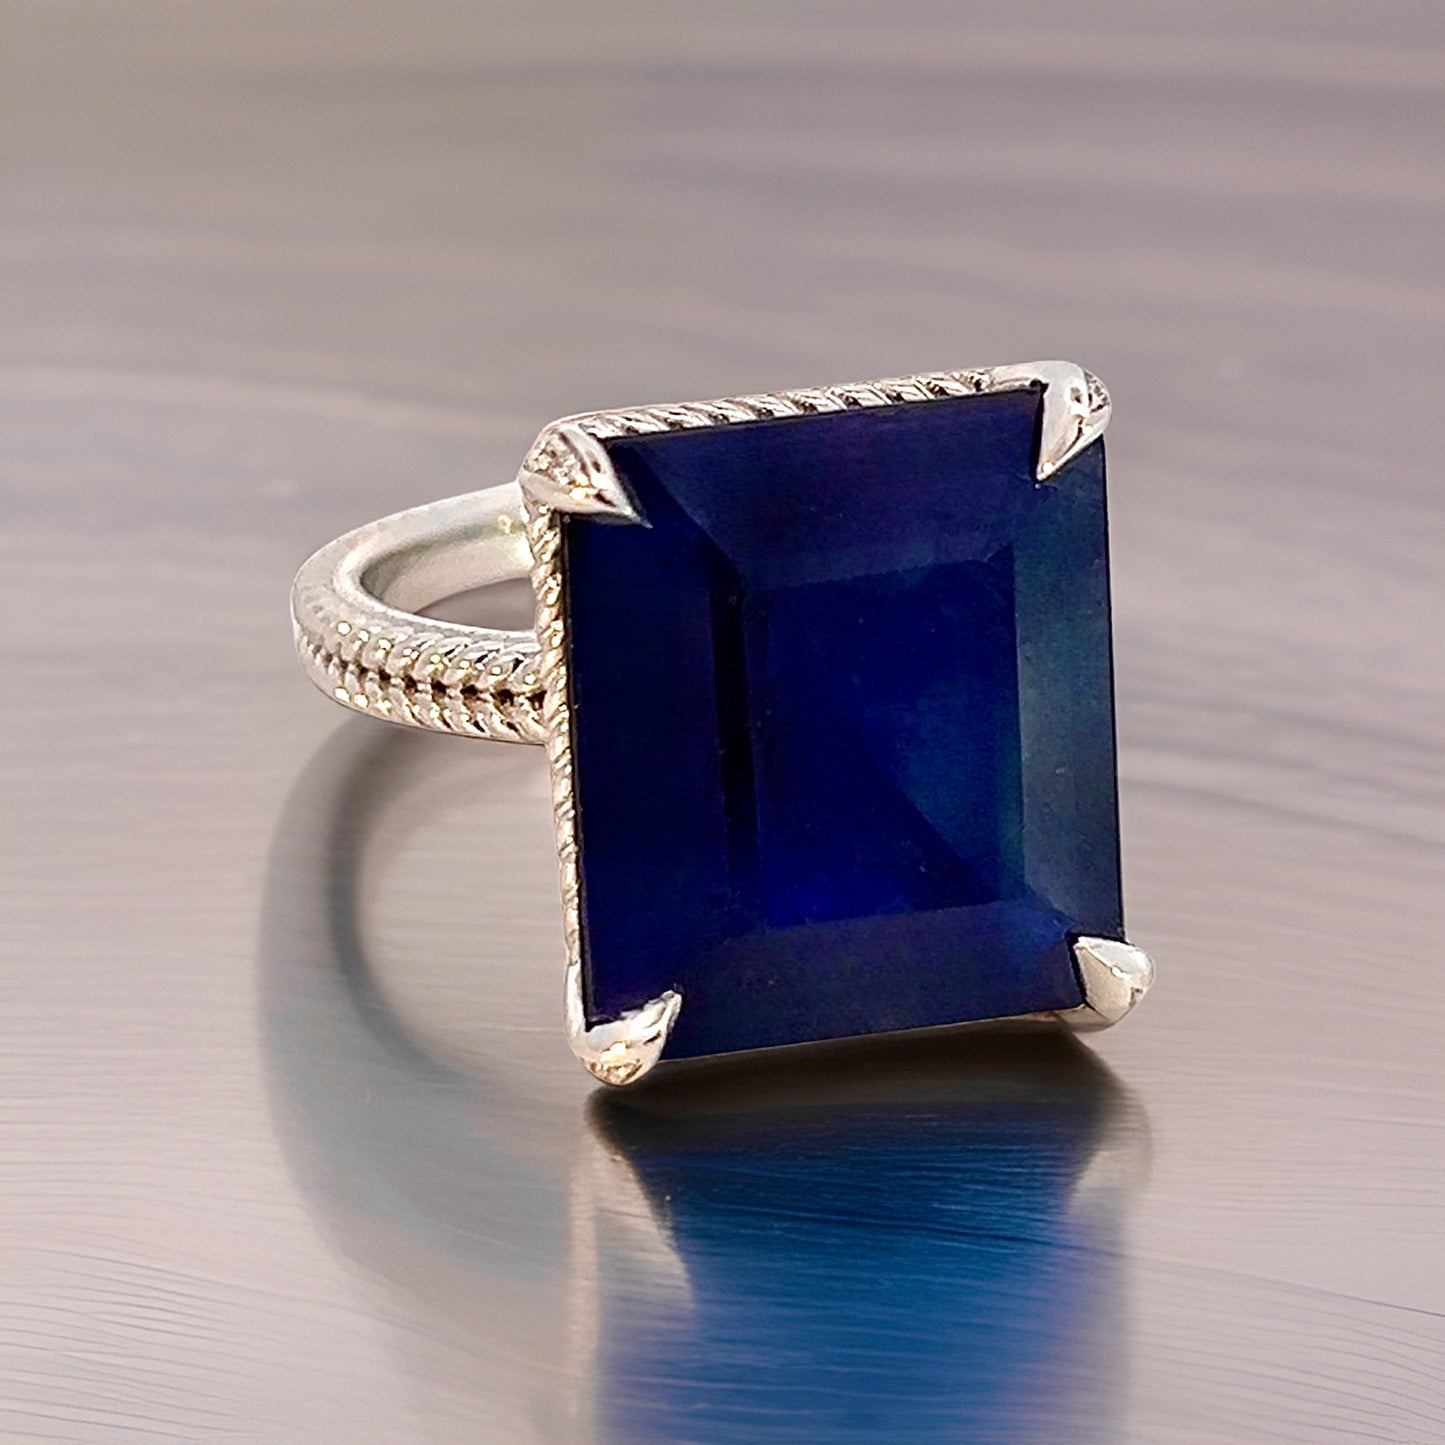 Natural Solitaire Sapphire Ring 6.5 14k W Gold 7 TCW Certified $3,150 310545